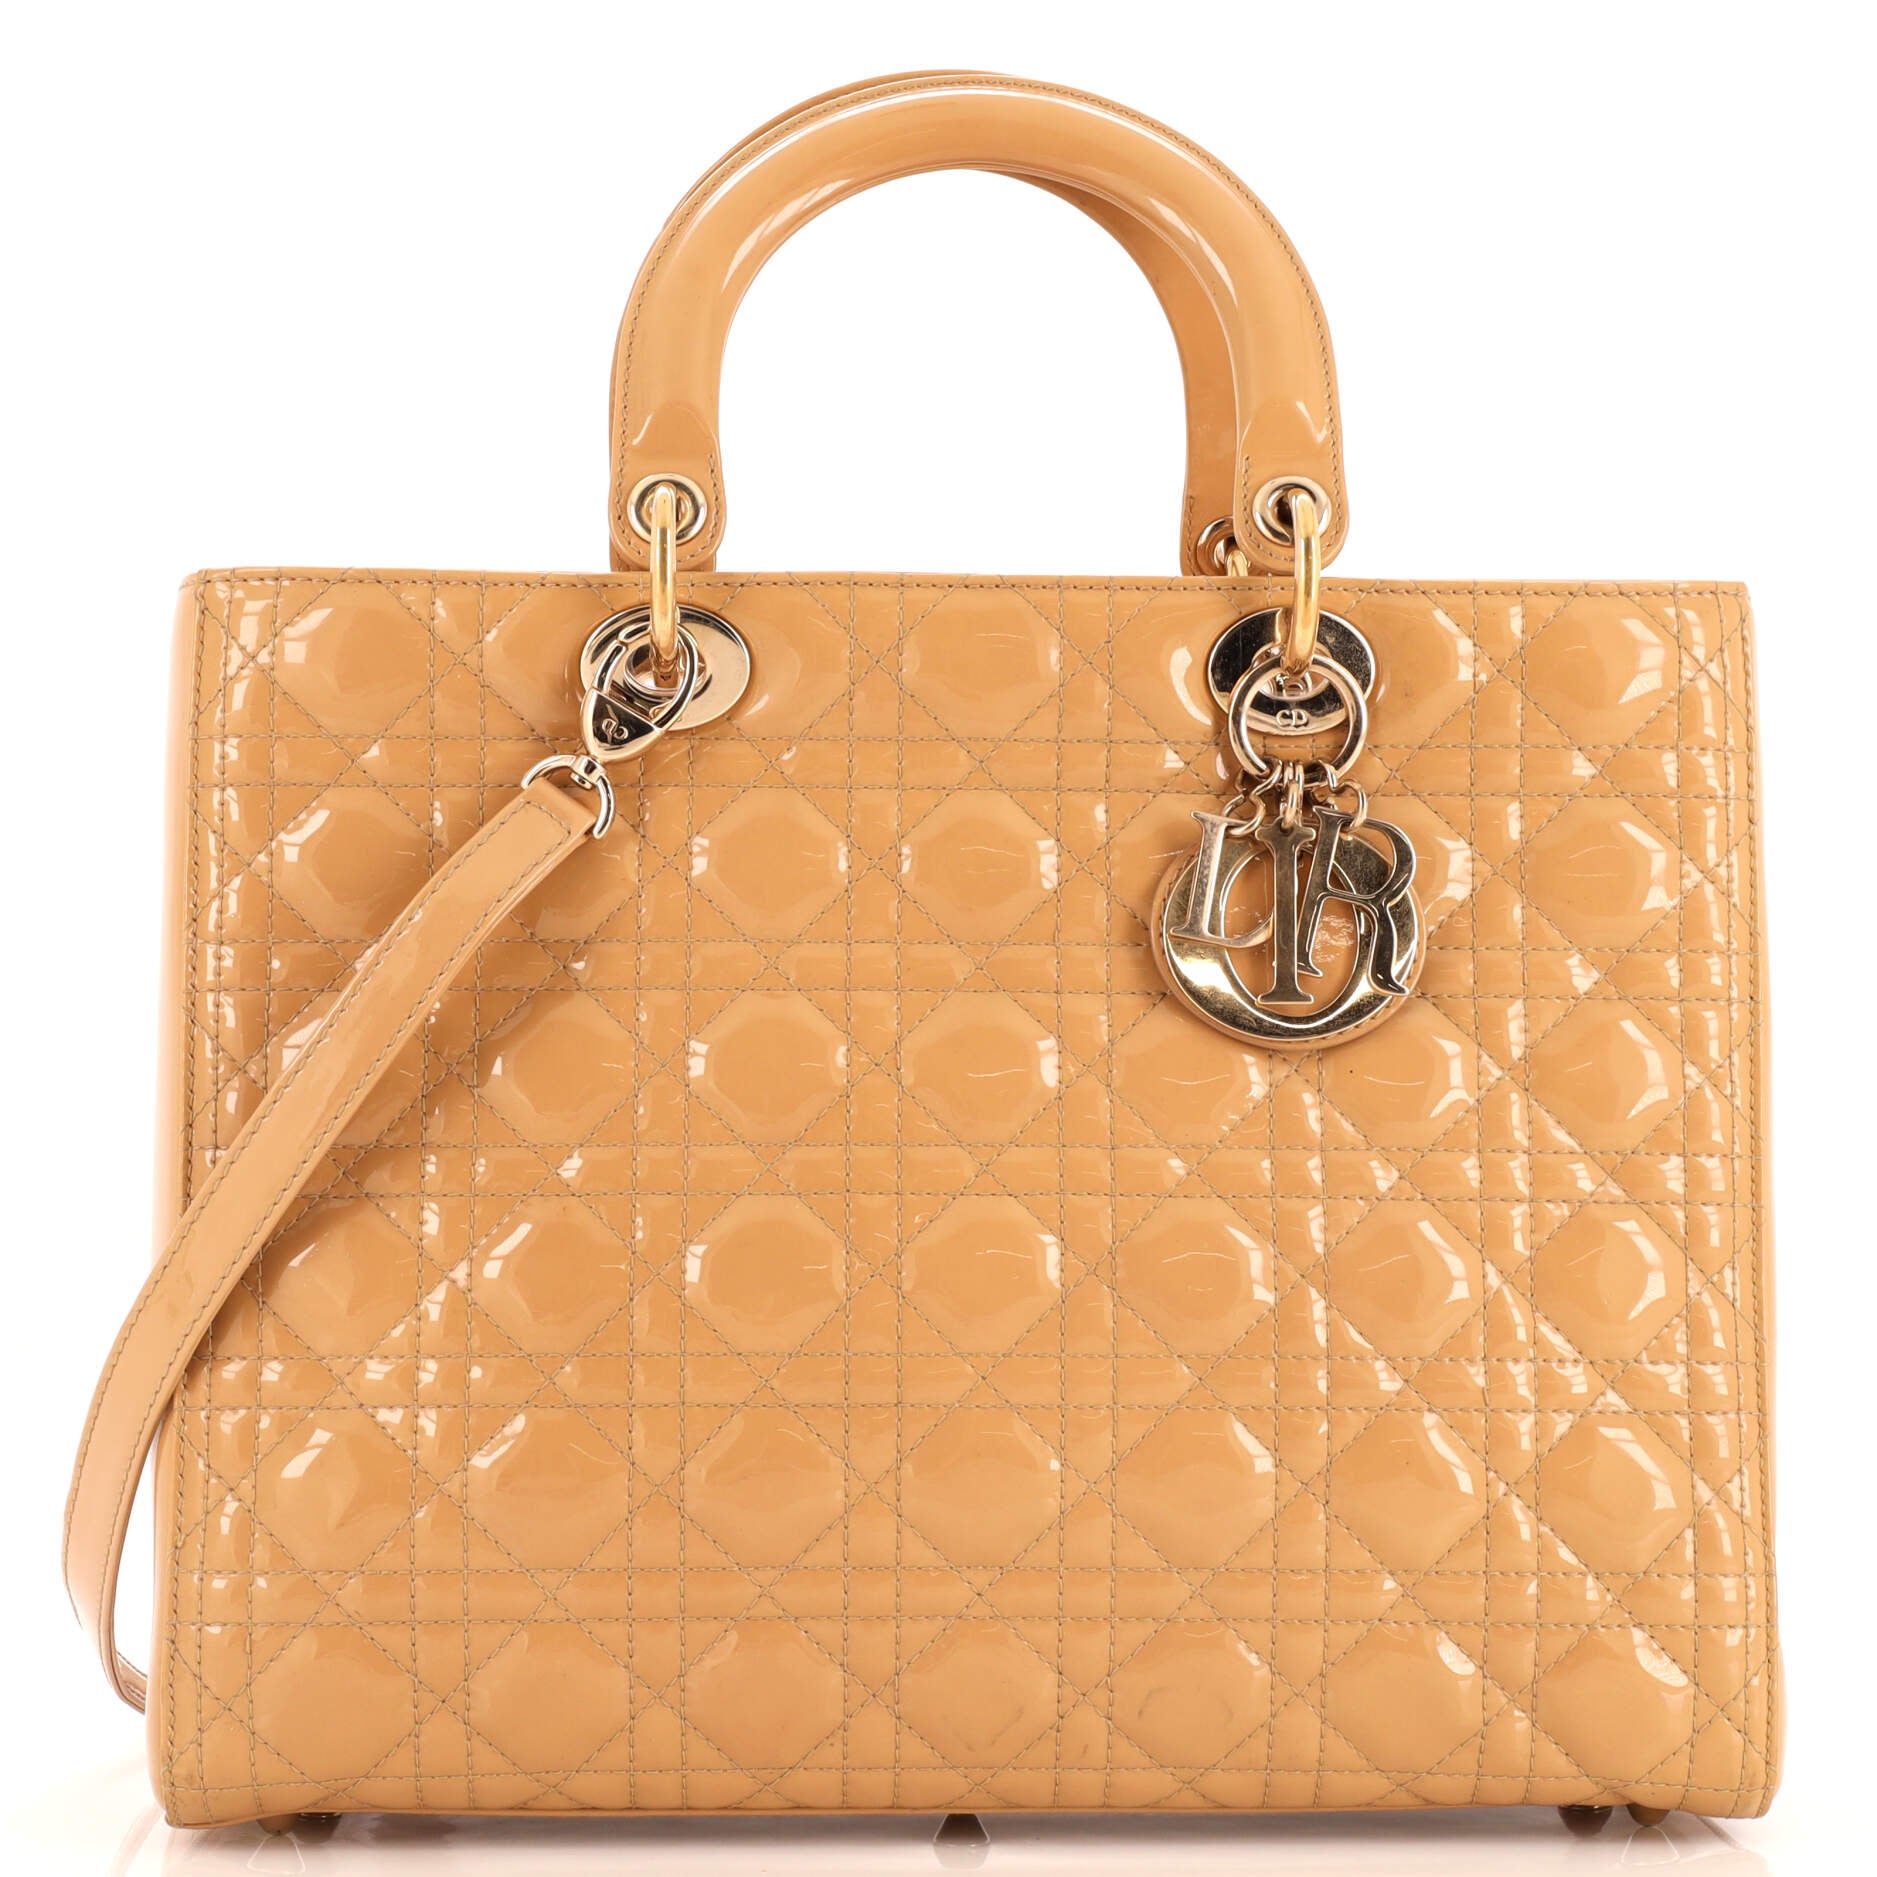 Lady Dior Bag Cannage Quilt Patent Large